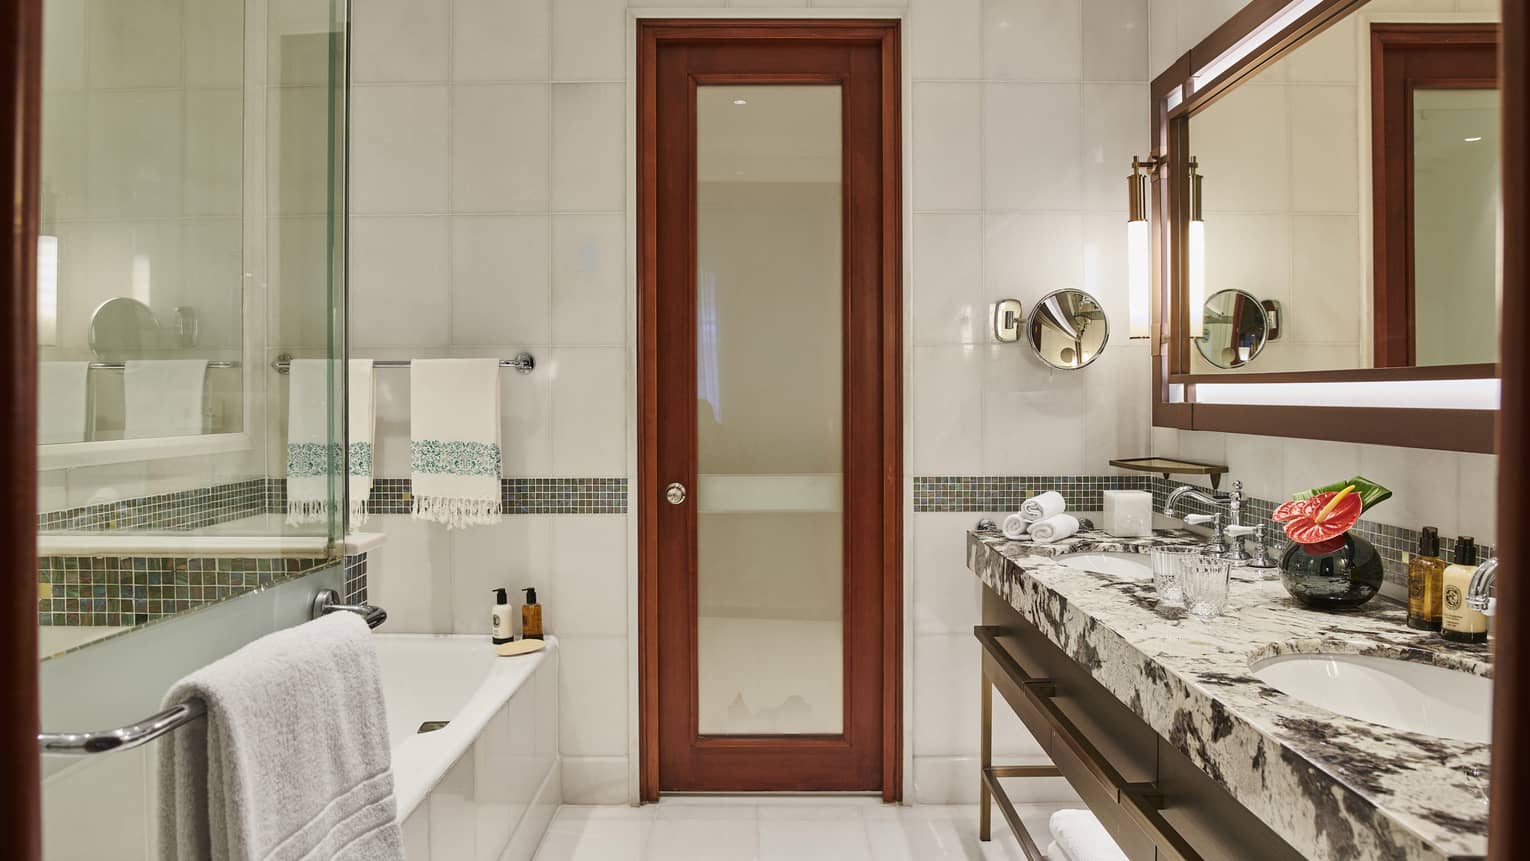 Luxurious bathroom with glass-enclosed shower, soaking tub, full marble vanity and brown mirror and door